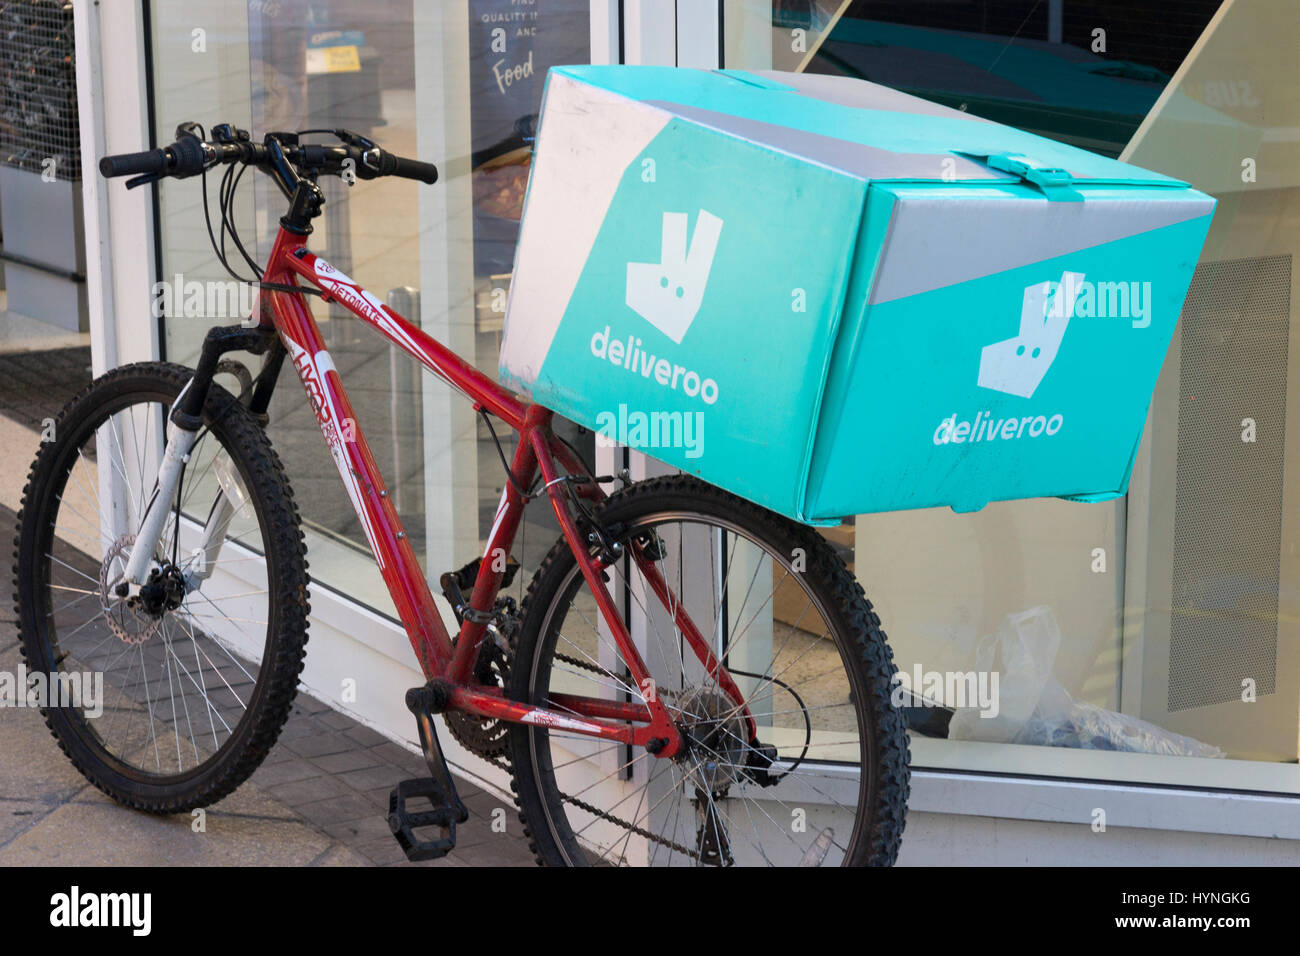 A deliveroo bicycle in Basingstoke Stock Photo